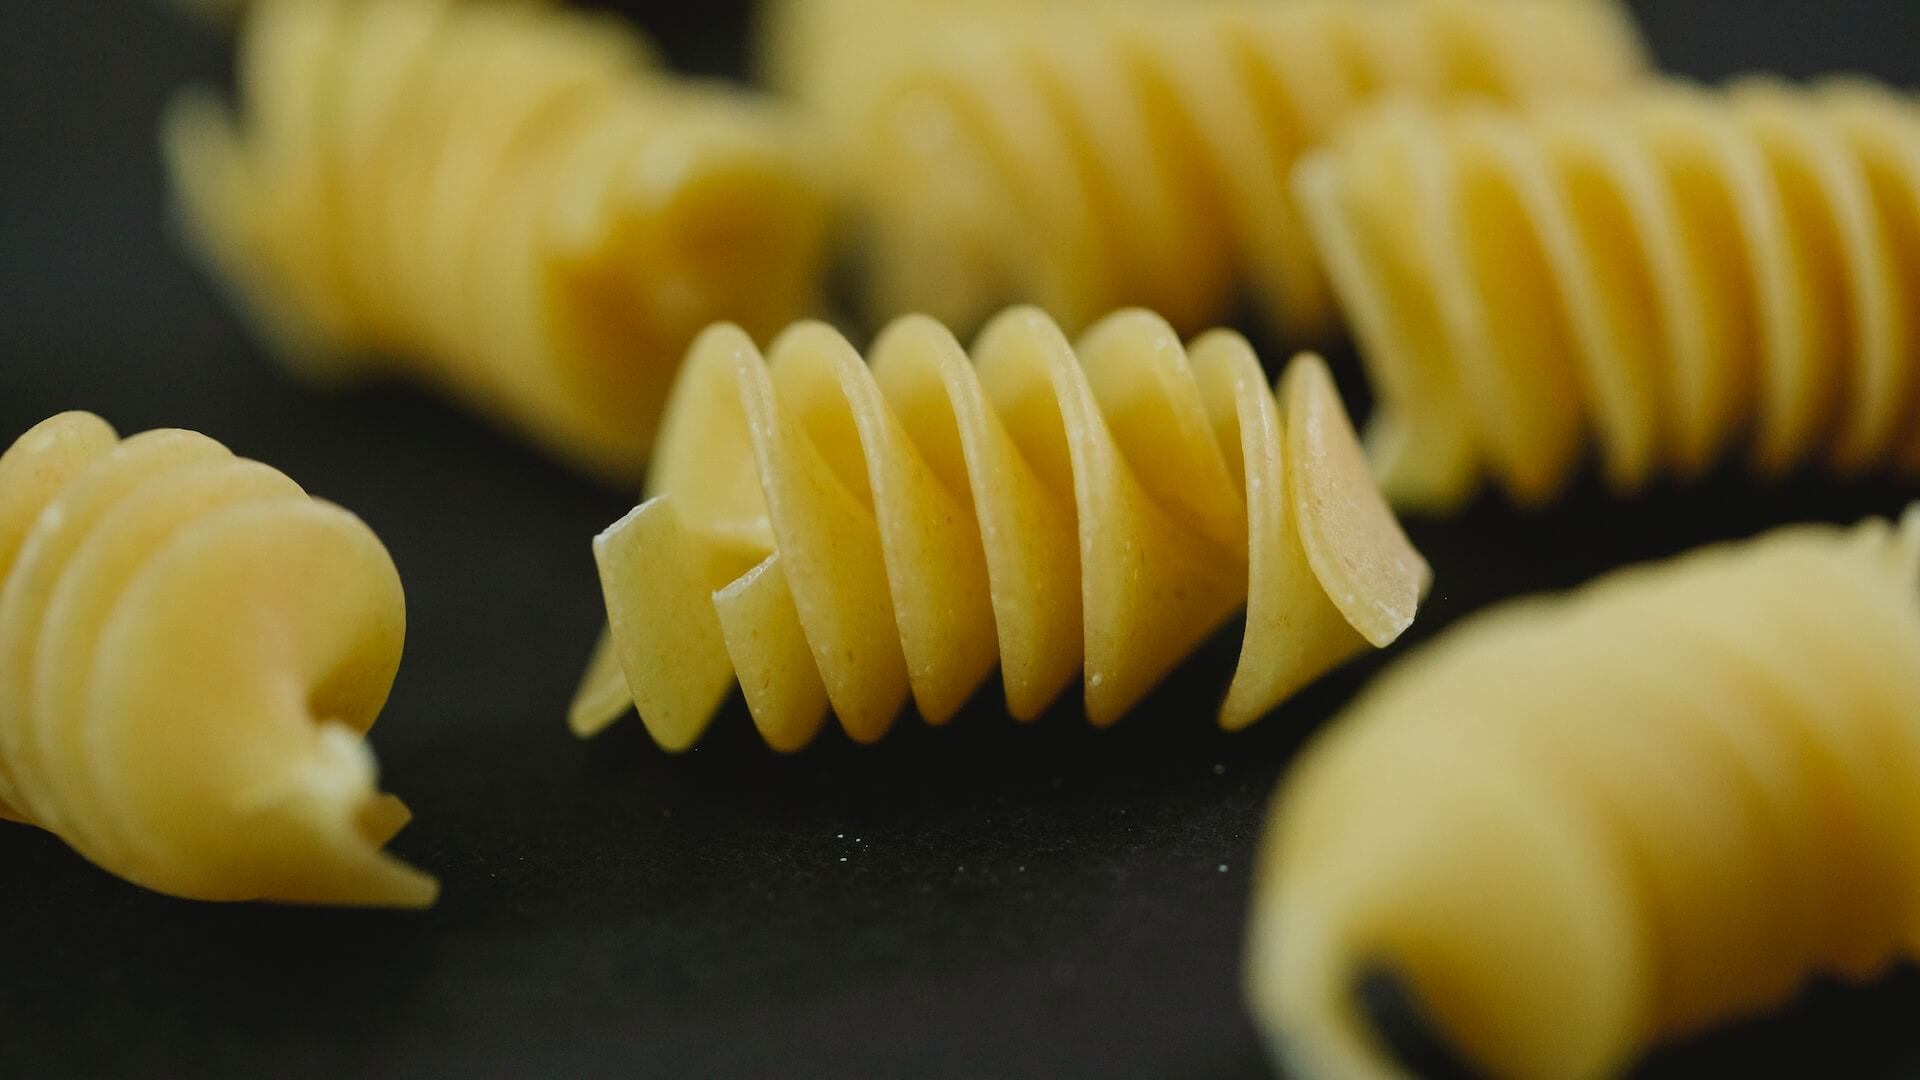 A close-up view of uncooked pasta noodles, showcasing various shapes and textures.